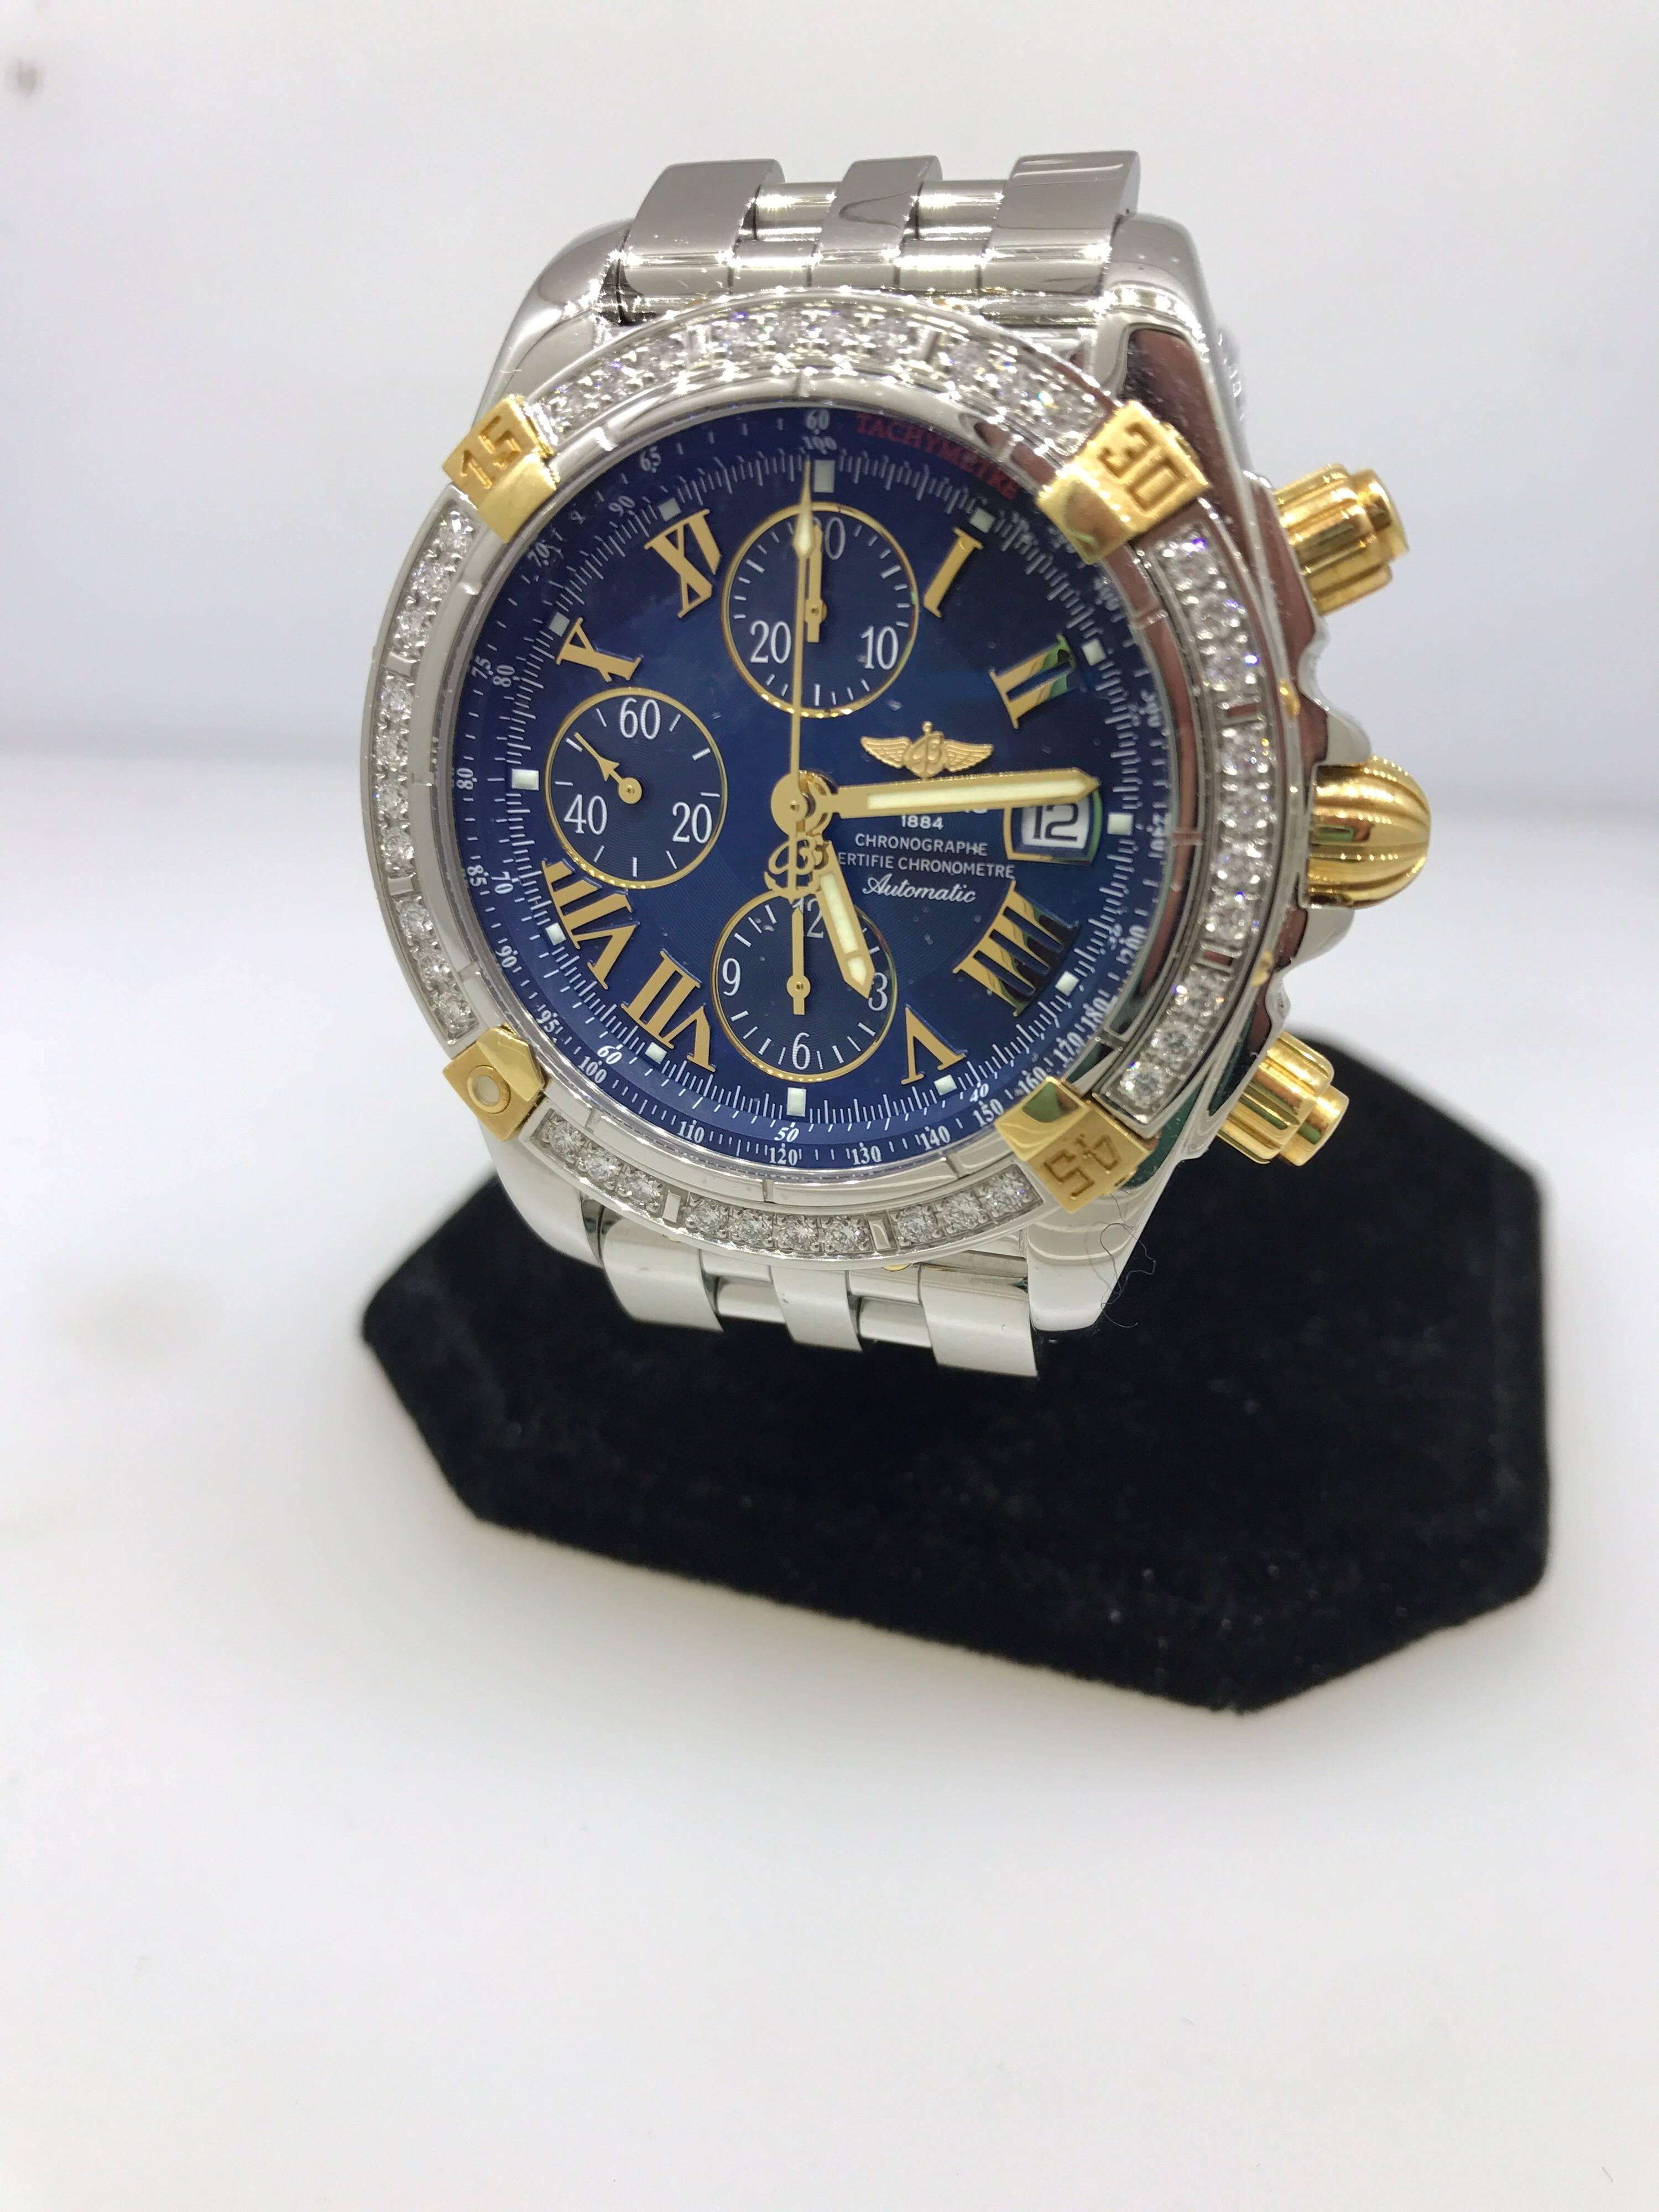 Breitling Chronomat Evolution Two Tone Men's Watch

Model Number: B1335653

100% Authentic

Brand New

Comes with original Breitling box, warranty, and instruction manual

Stainless Steel and 18 Karat Yellow Gold Case

40 Diamonds on the Bezel

Blue